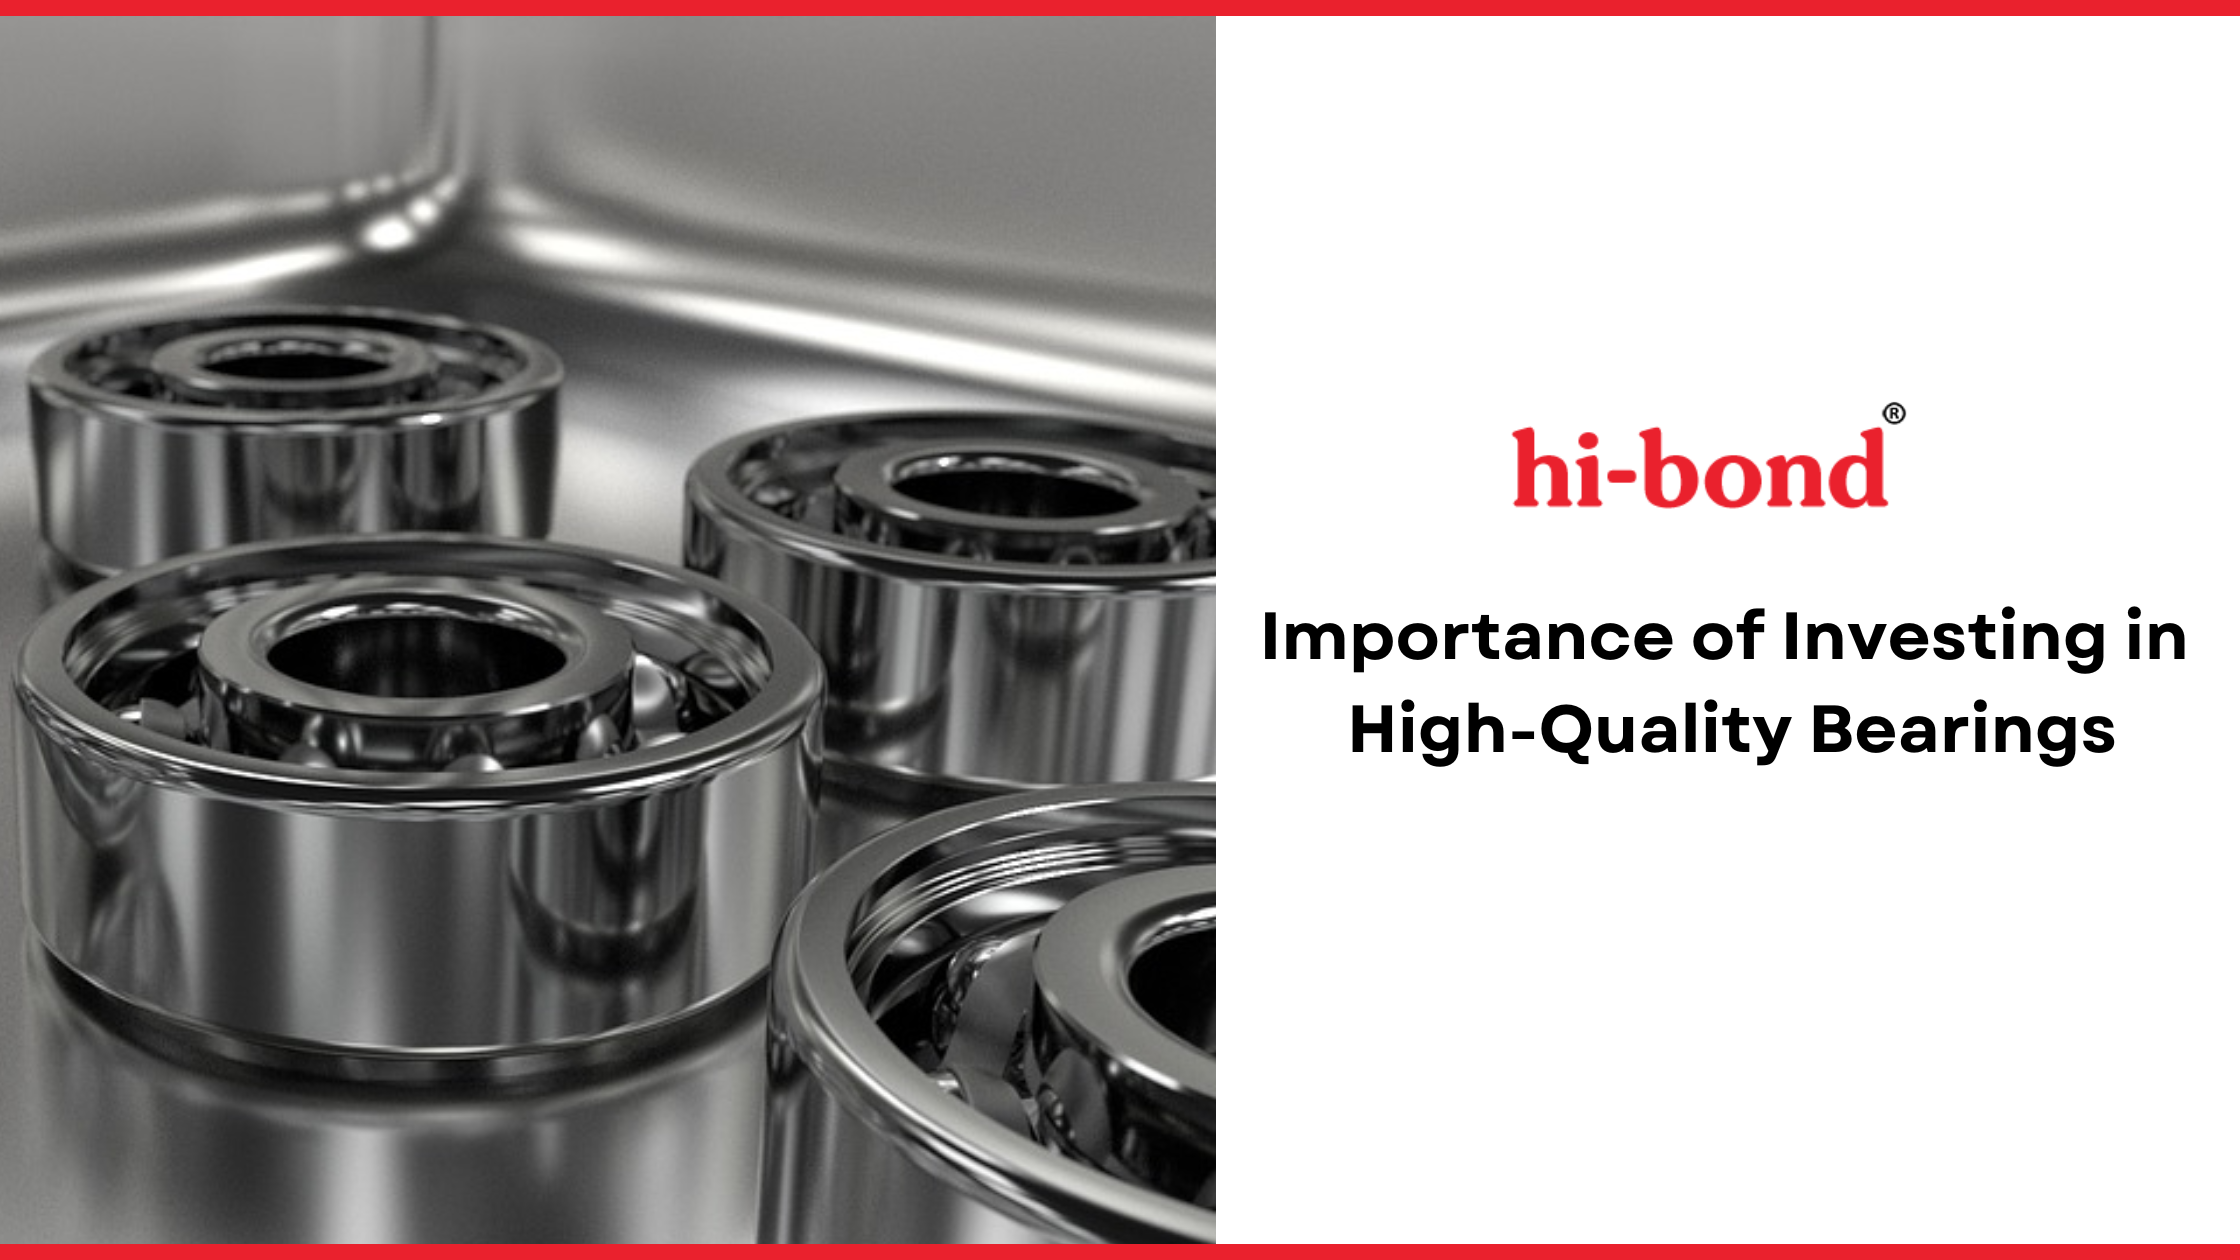 Importance of Investing in High-Quality Bearings